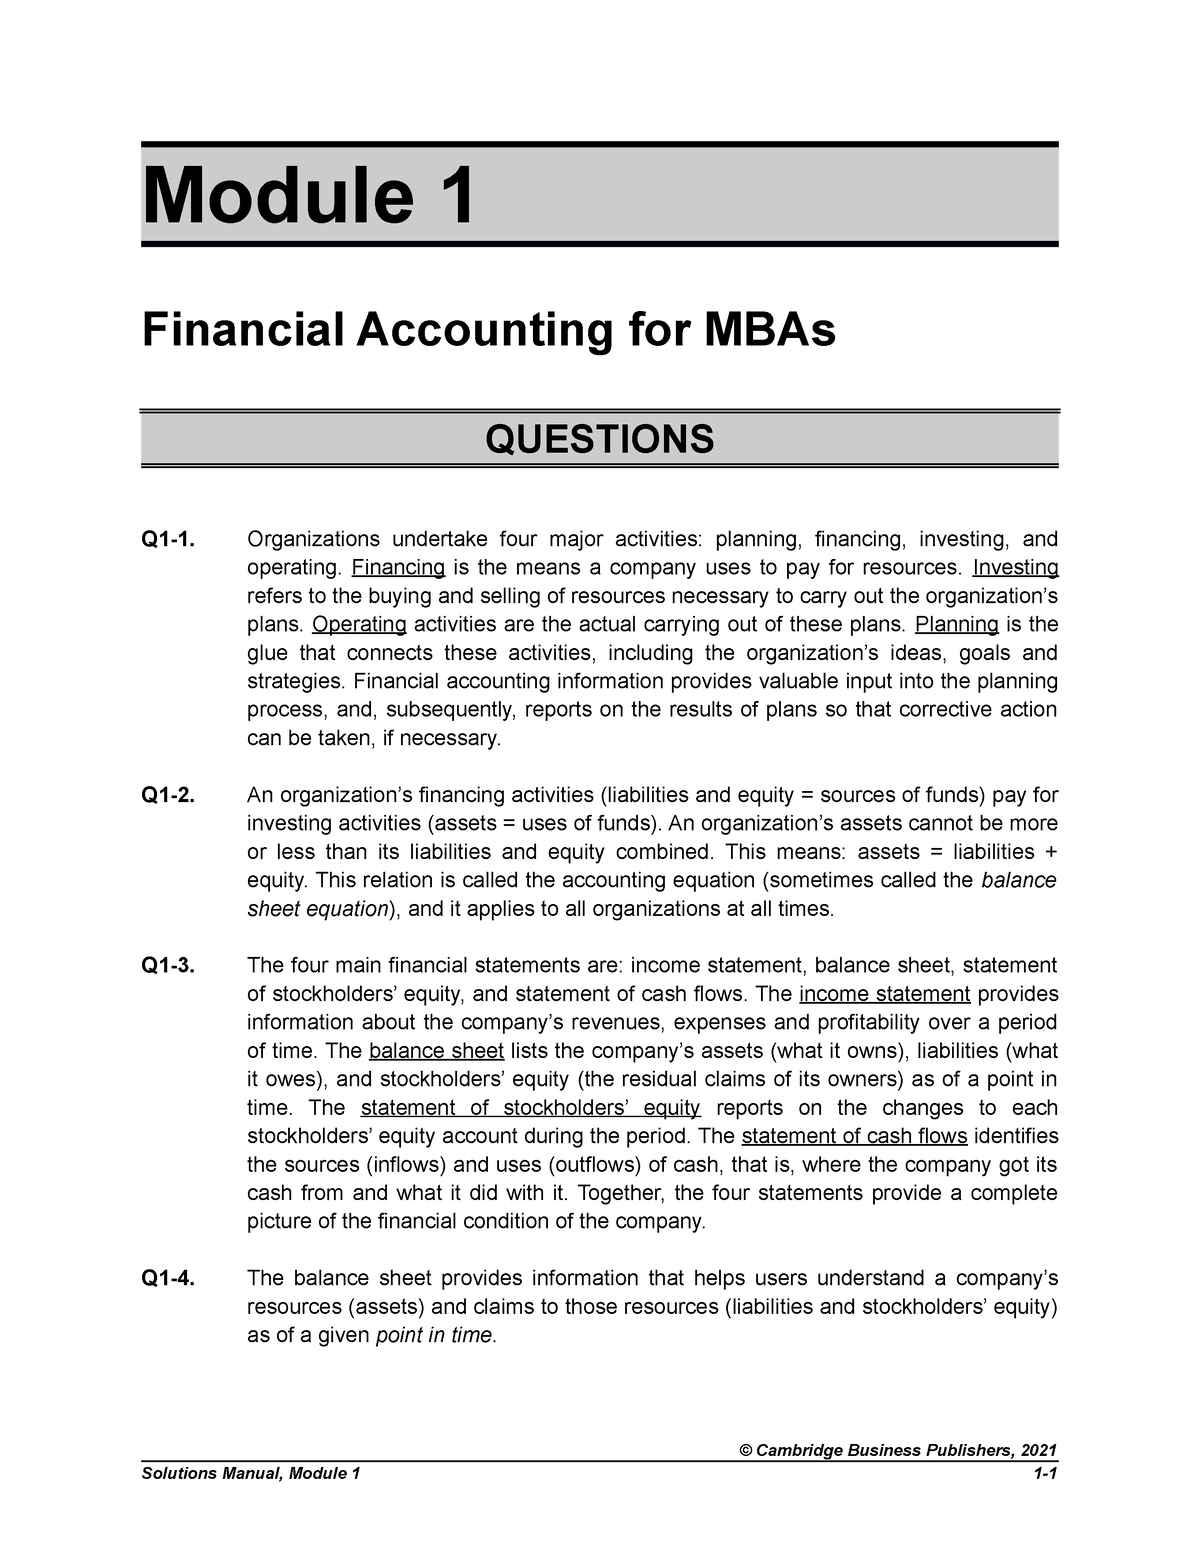 Homework Solutions - Module 1 - Module 1 Financial Accounting for